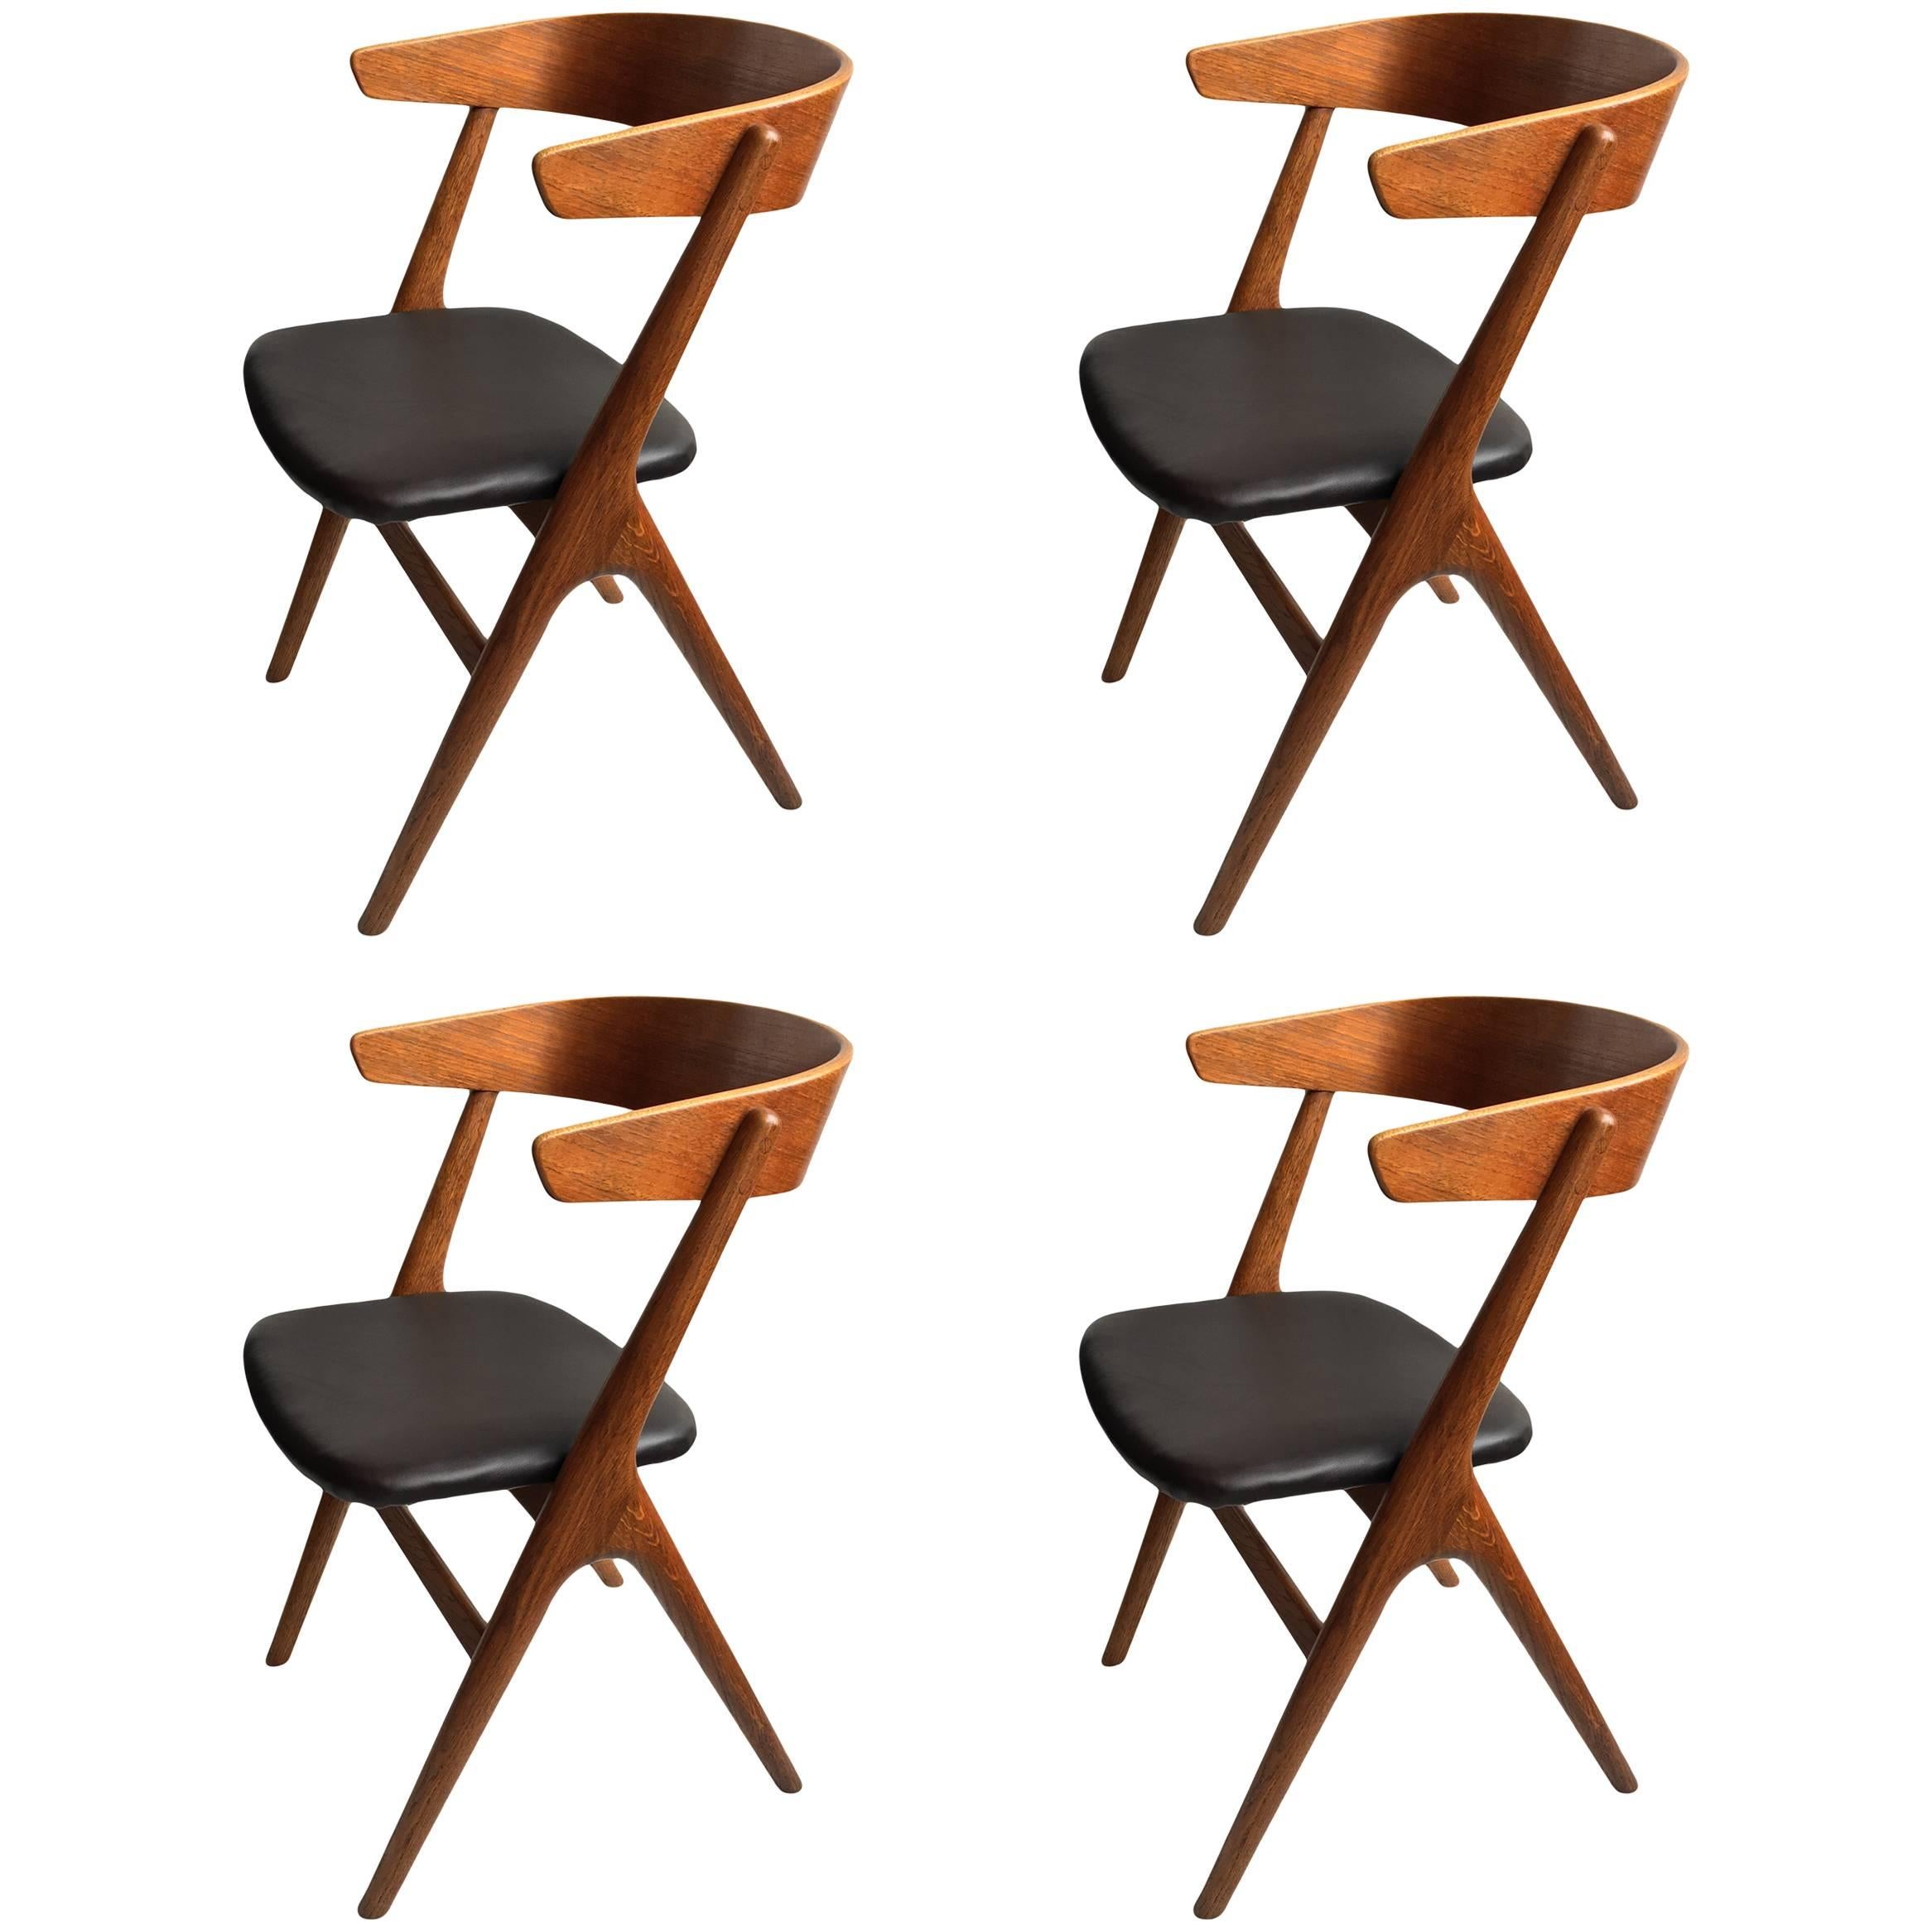 Helge Sibast, Rare Set of Four Chairs, Fully Refurbished